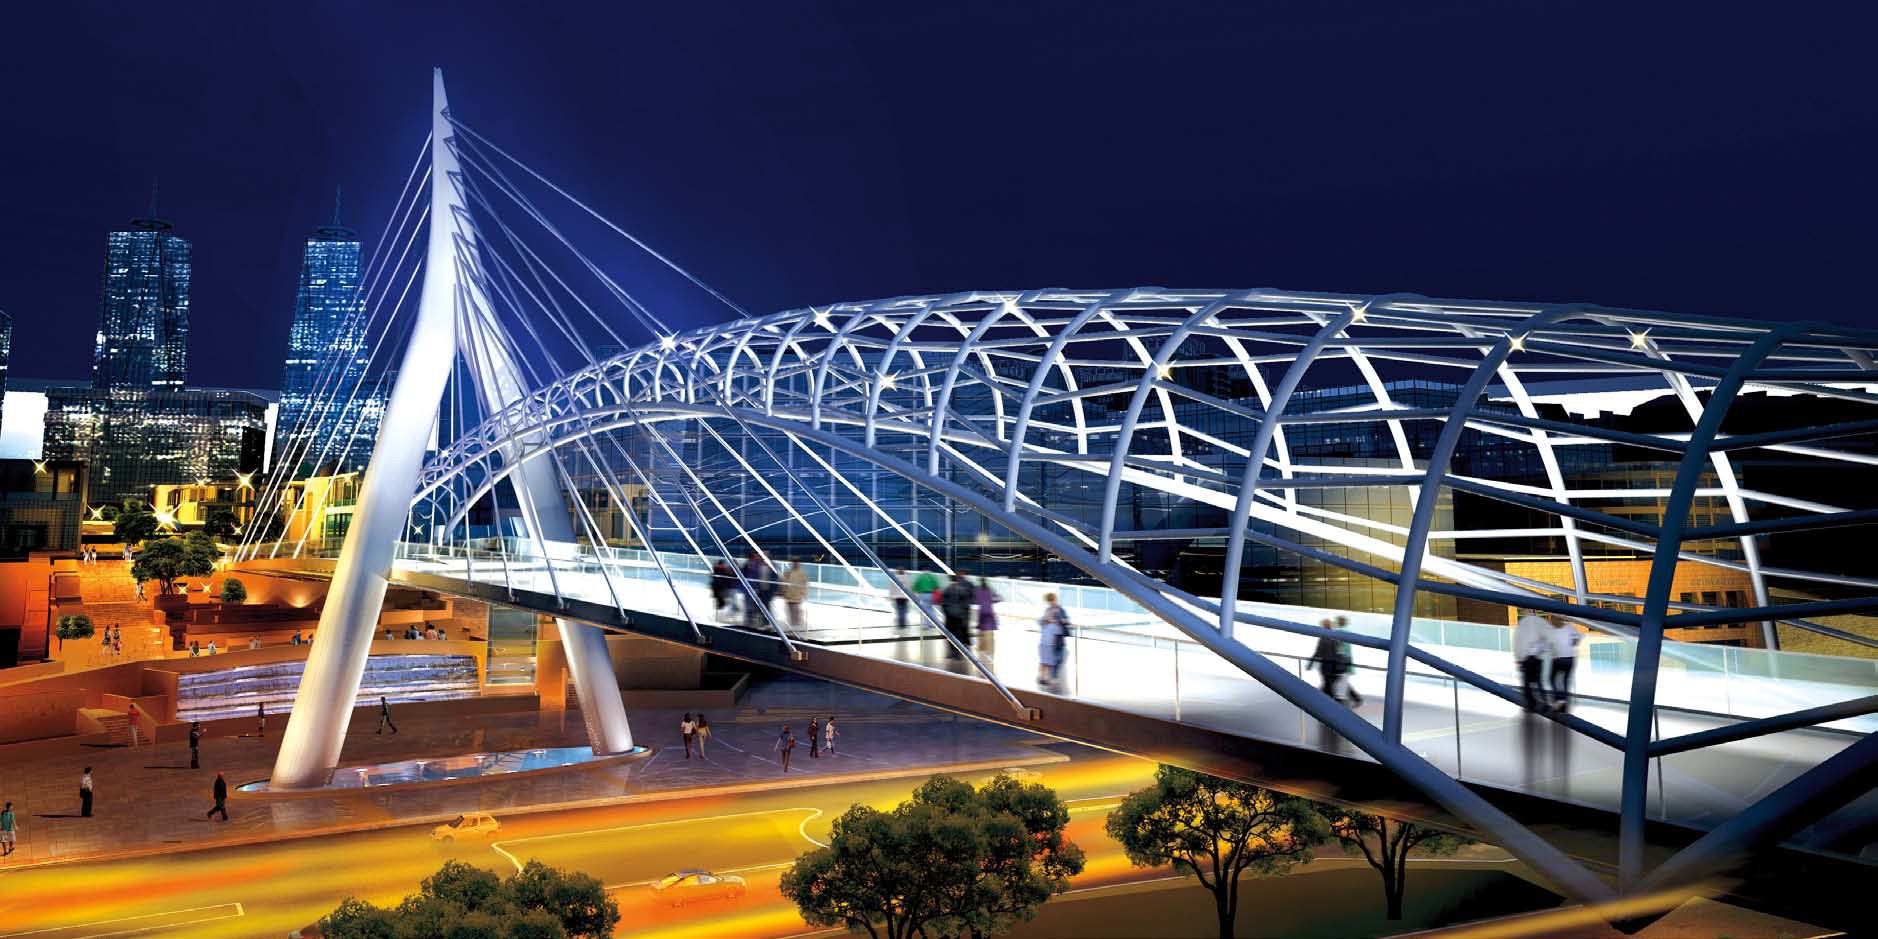 https://www.yizuo-media.com/albums/albums/userpics/10003/Cable_Stayed_Bridge.jpg